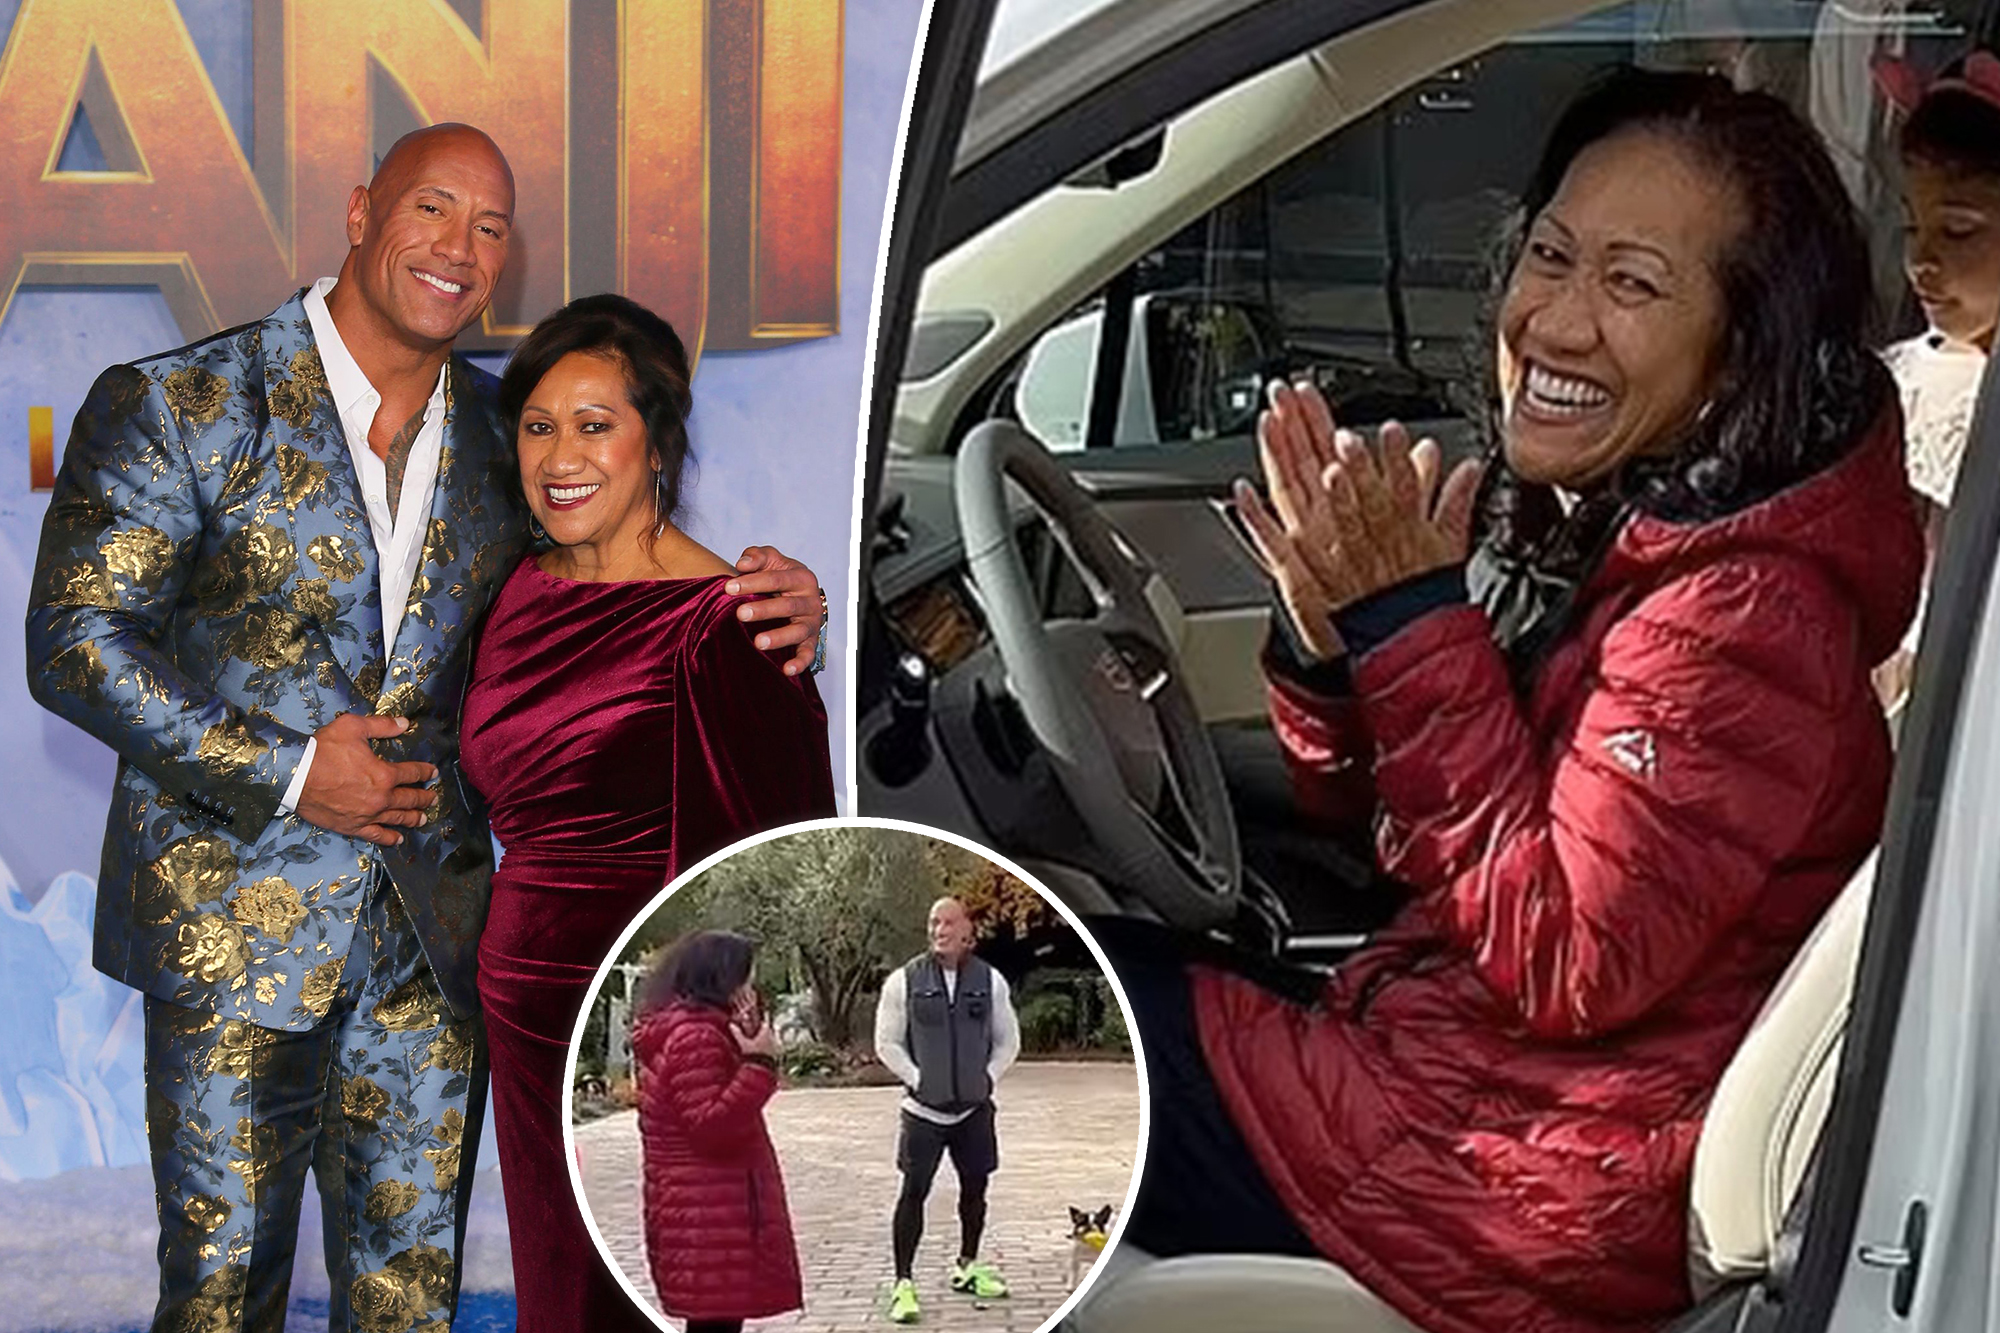 Dwayne Johnson surprises mom with Cadillac for Christmas